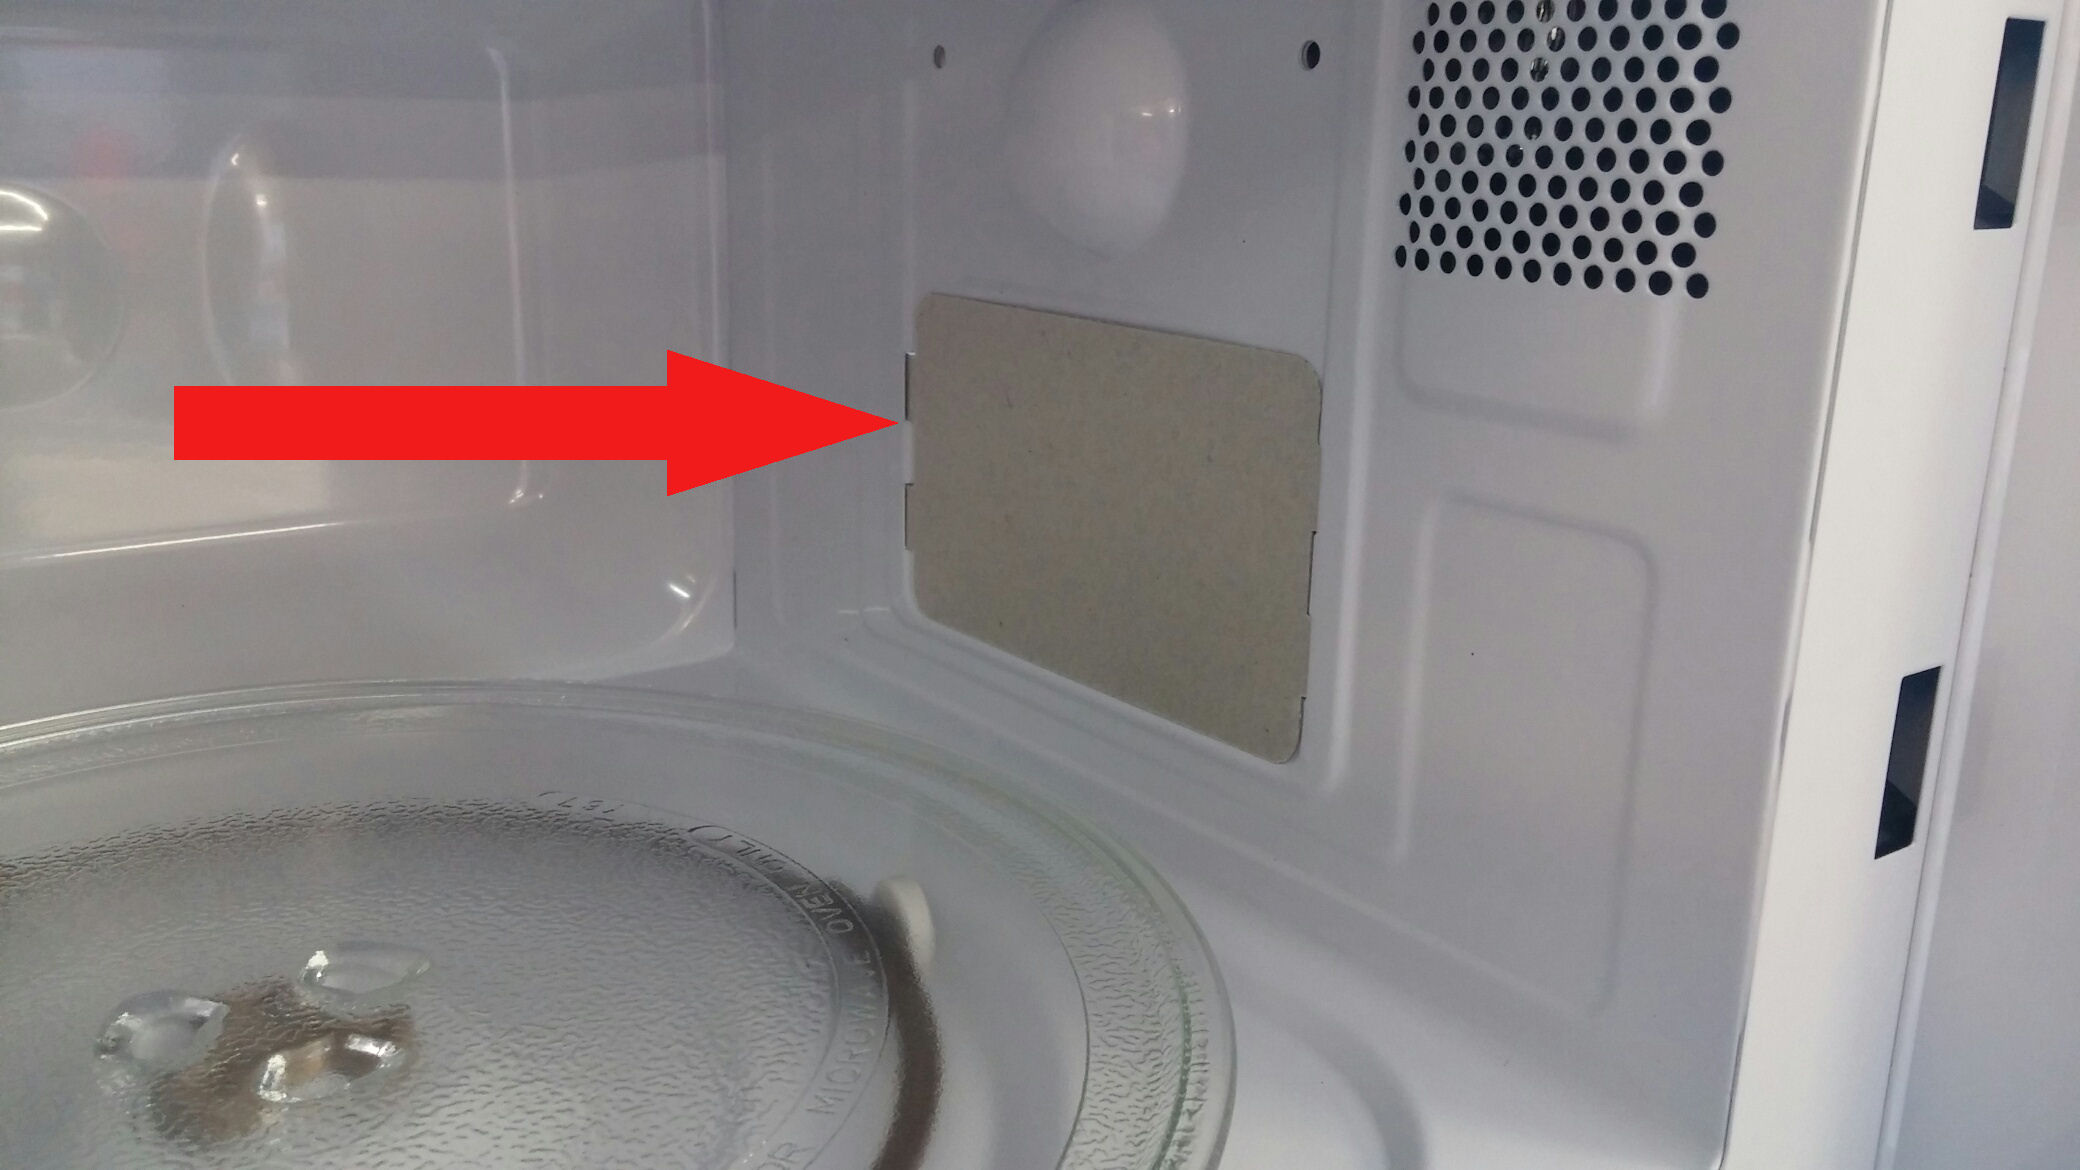 Can You Use a Microwave Without the Waveguide Cover